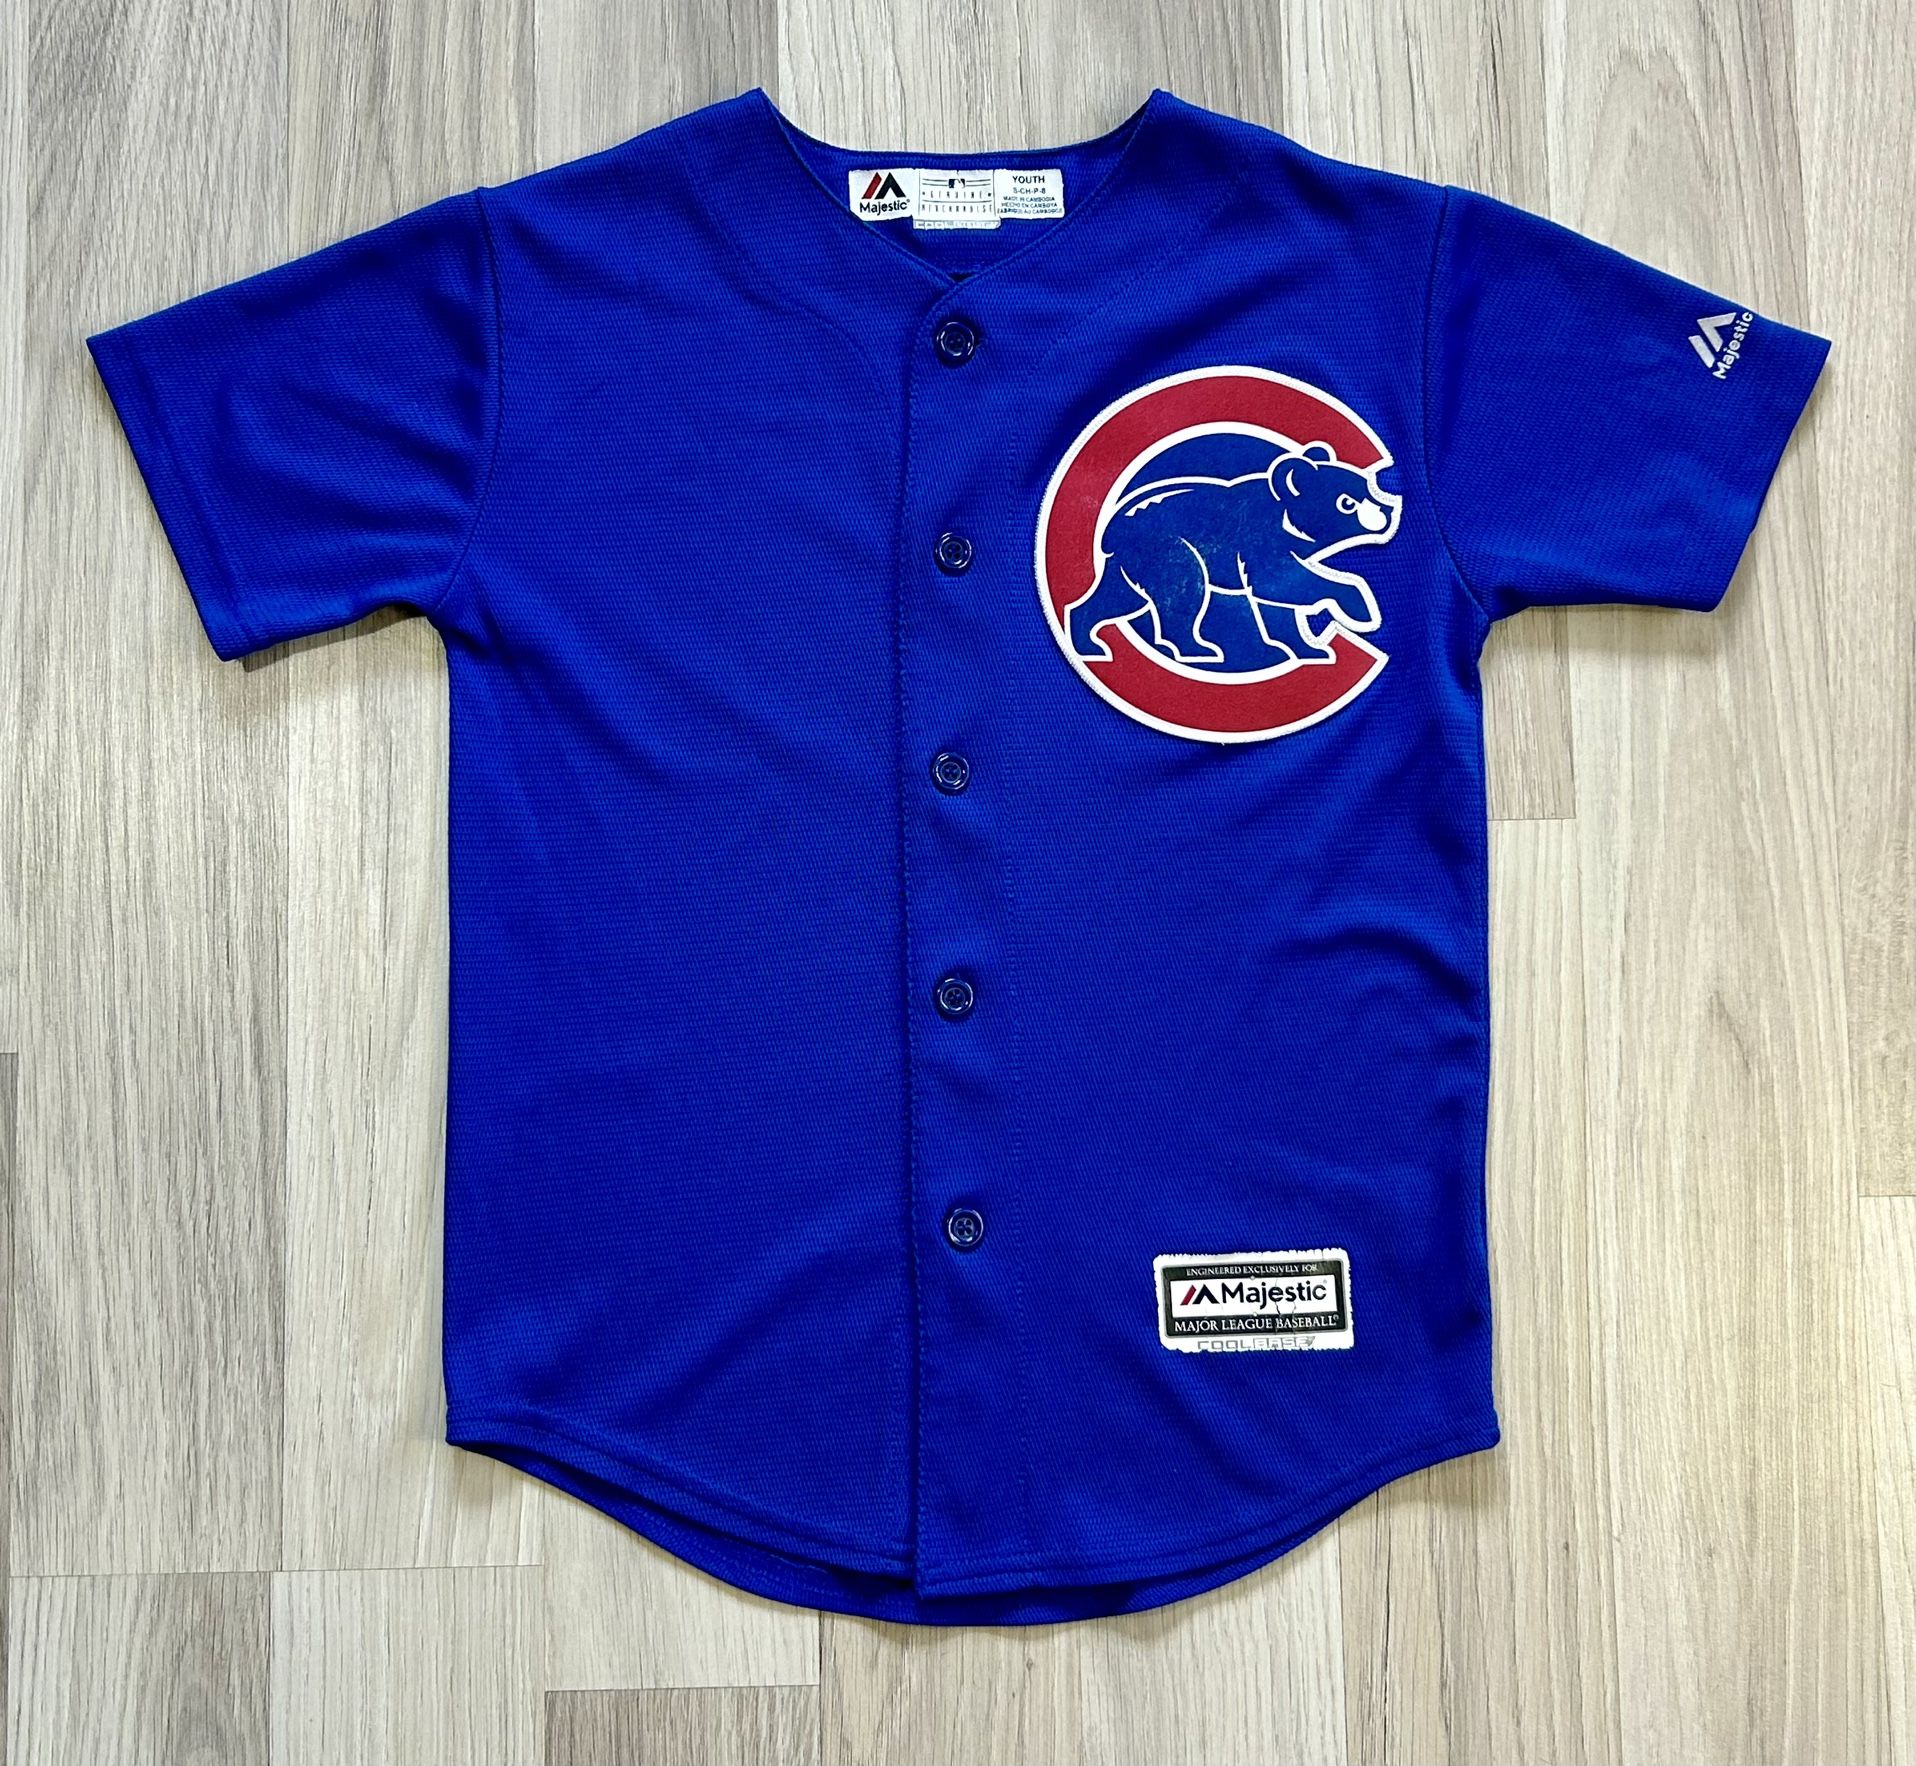  Chicago Cubs Majestic MLB Baseball Jersey Youth Small. Good Condition, See Pics.